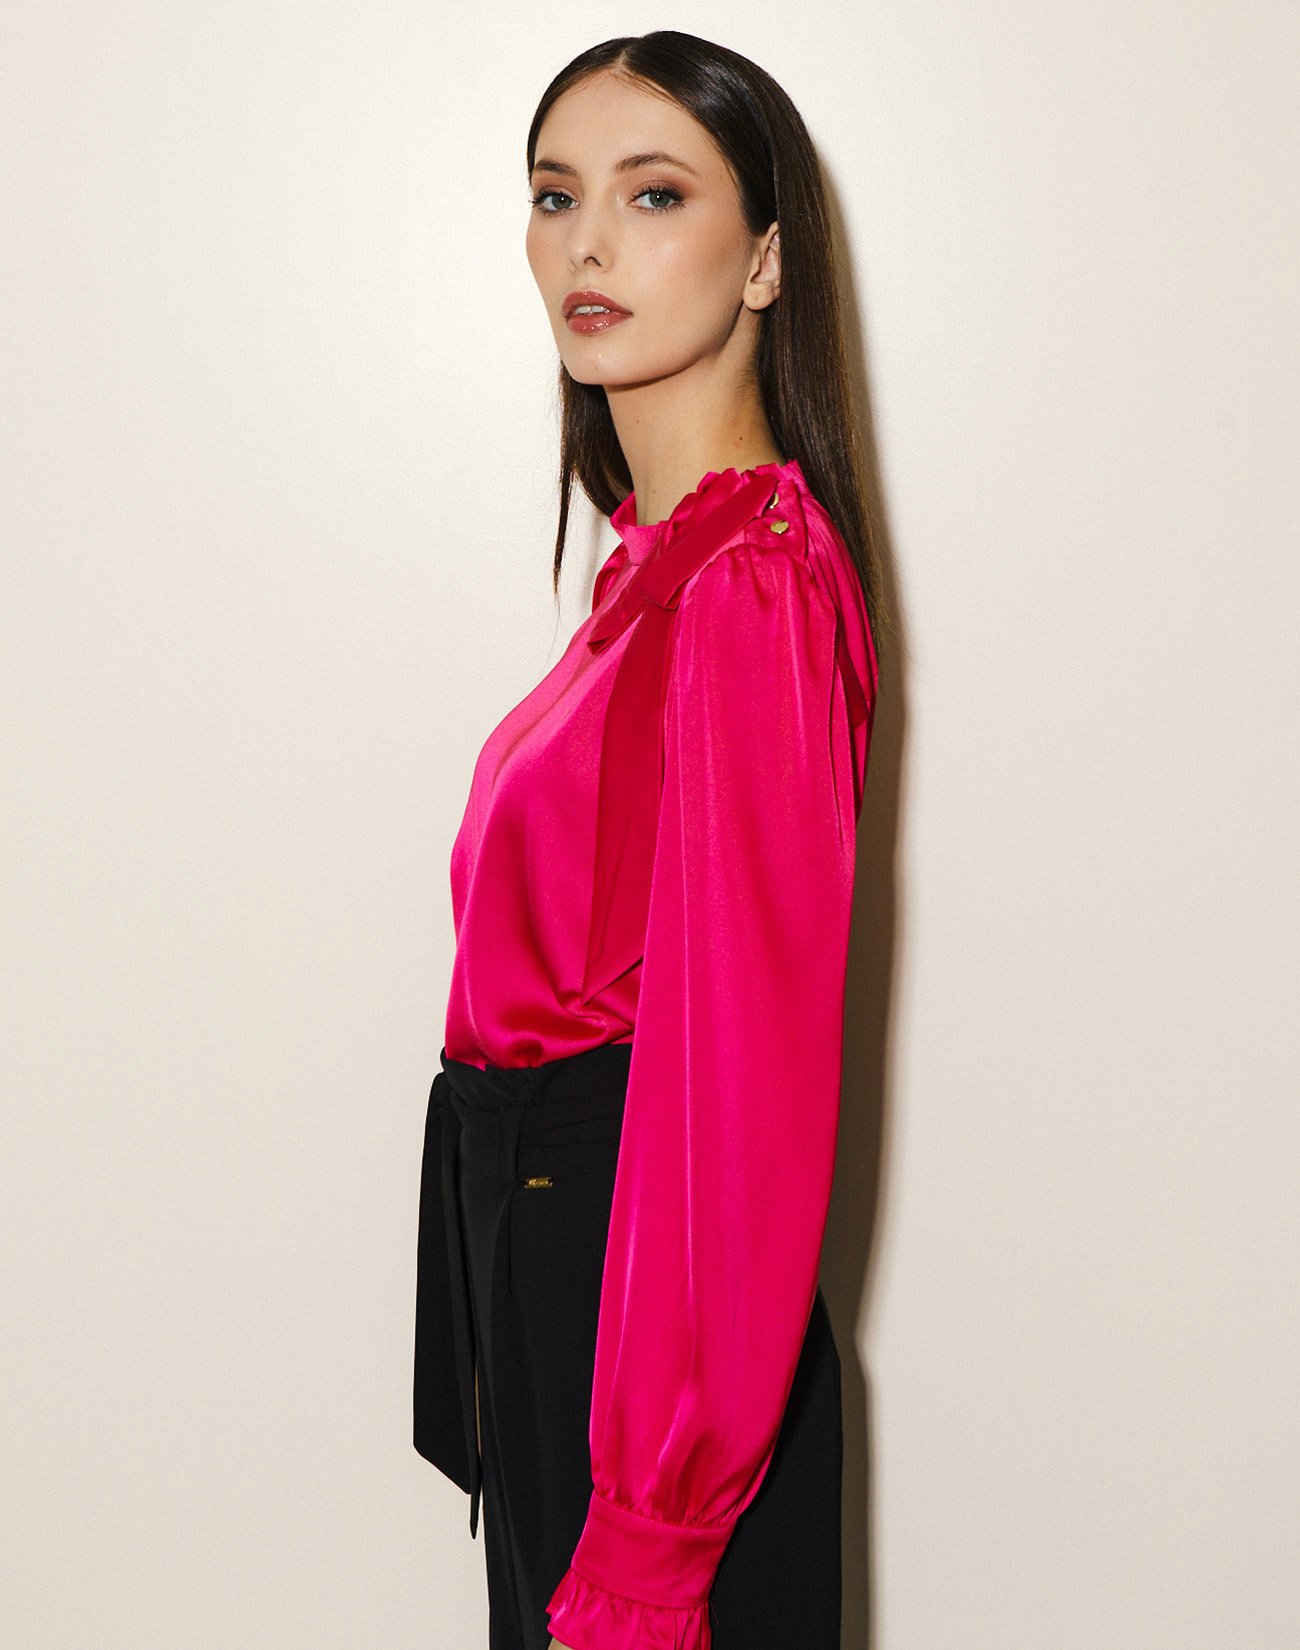 Satin blouse with tie